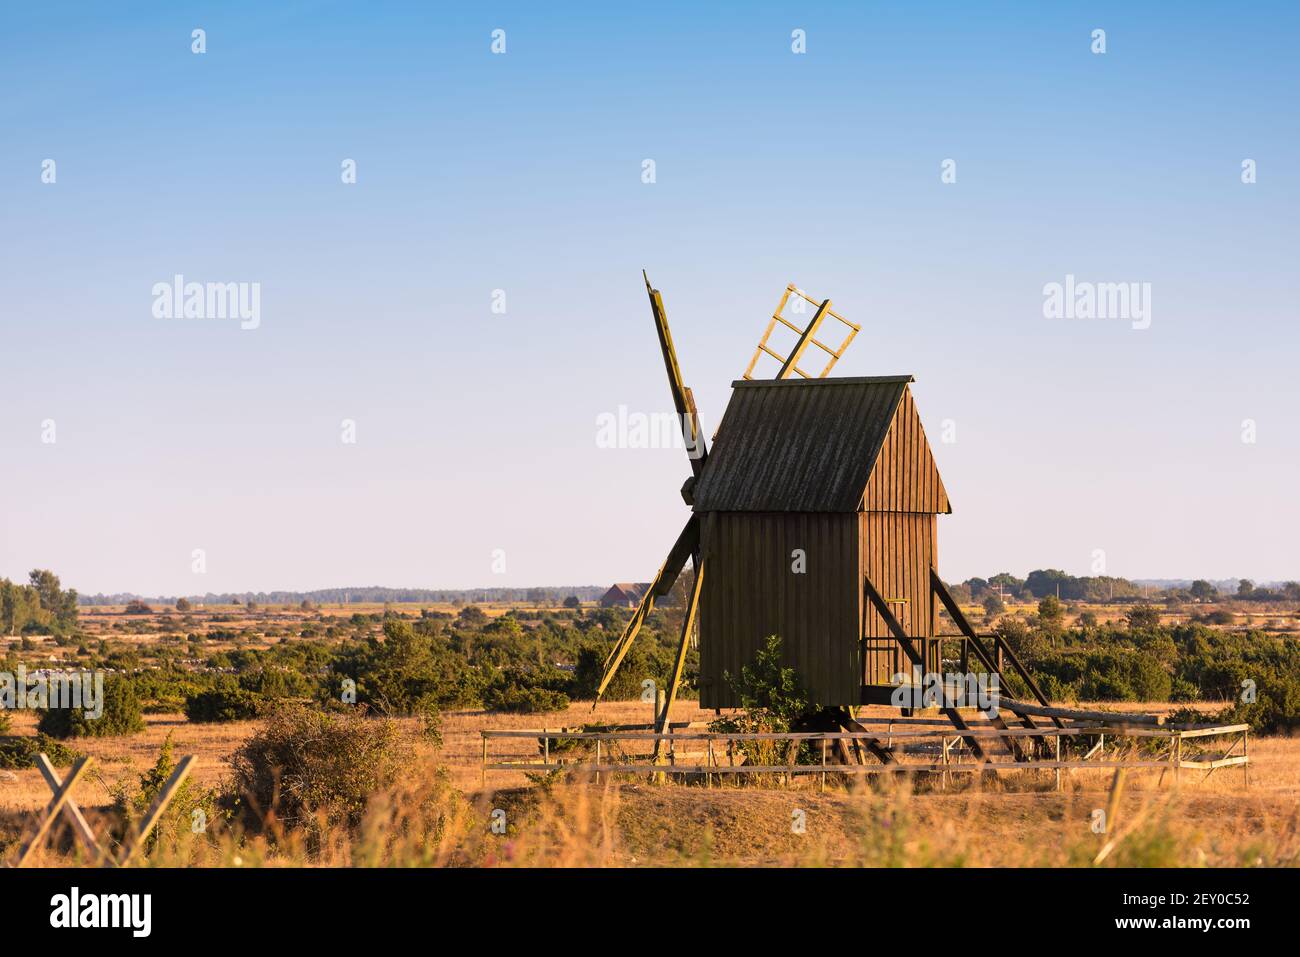 Old Windmill, Sweden Stock Photo